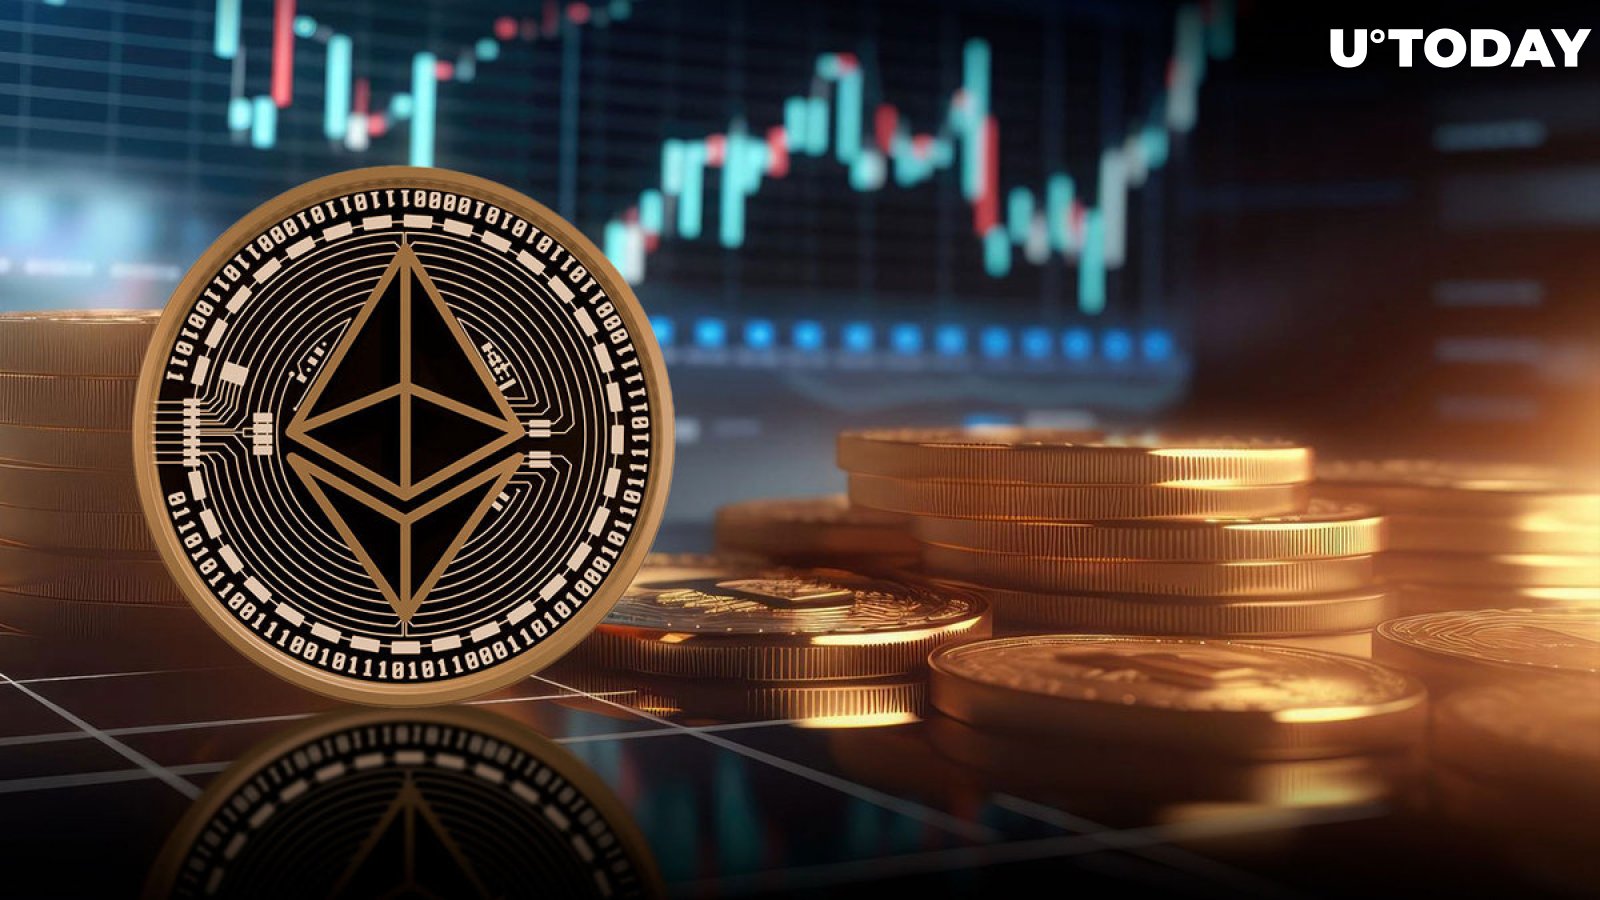 Ethereum (ETH) about to surpass $4,000: Will it happen?